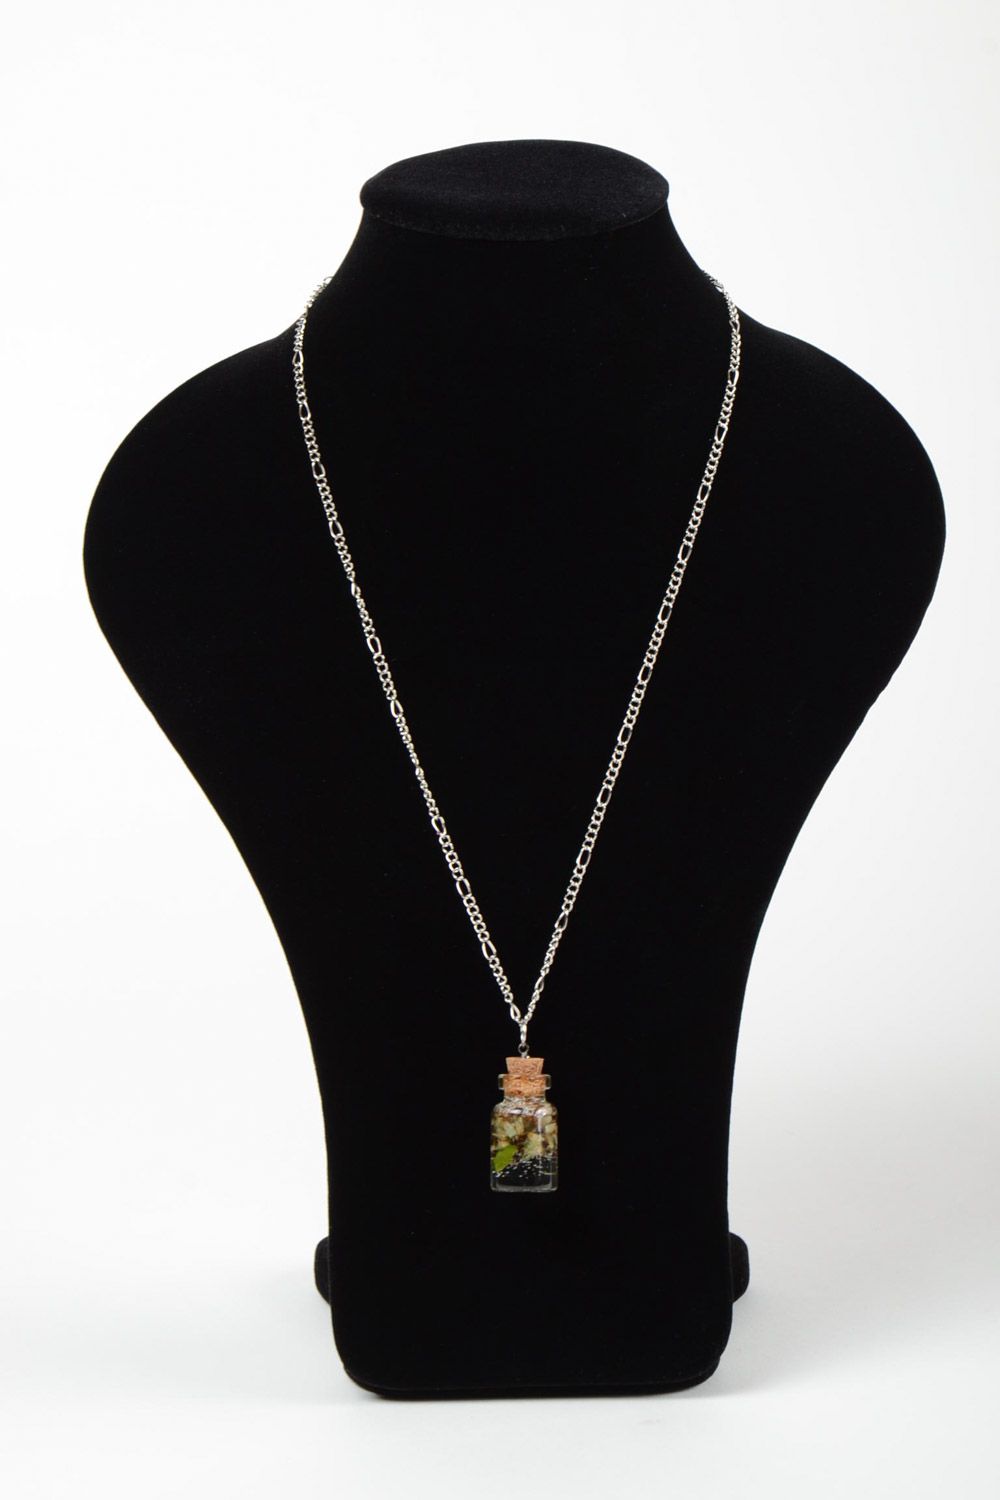 Handmade neck pendant with real flowers coated with epoxy in the shape of transparent vial photo 2